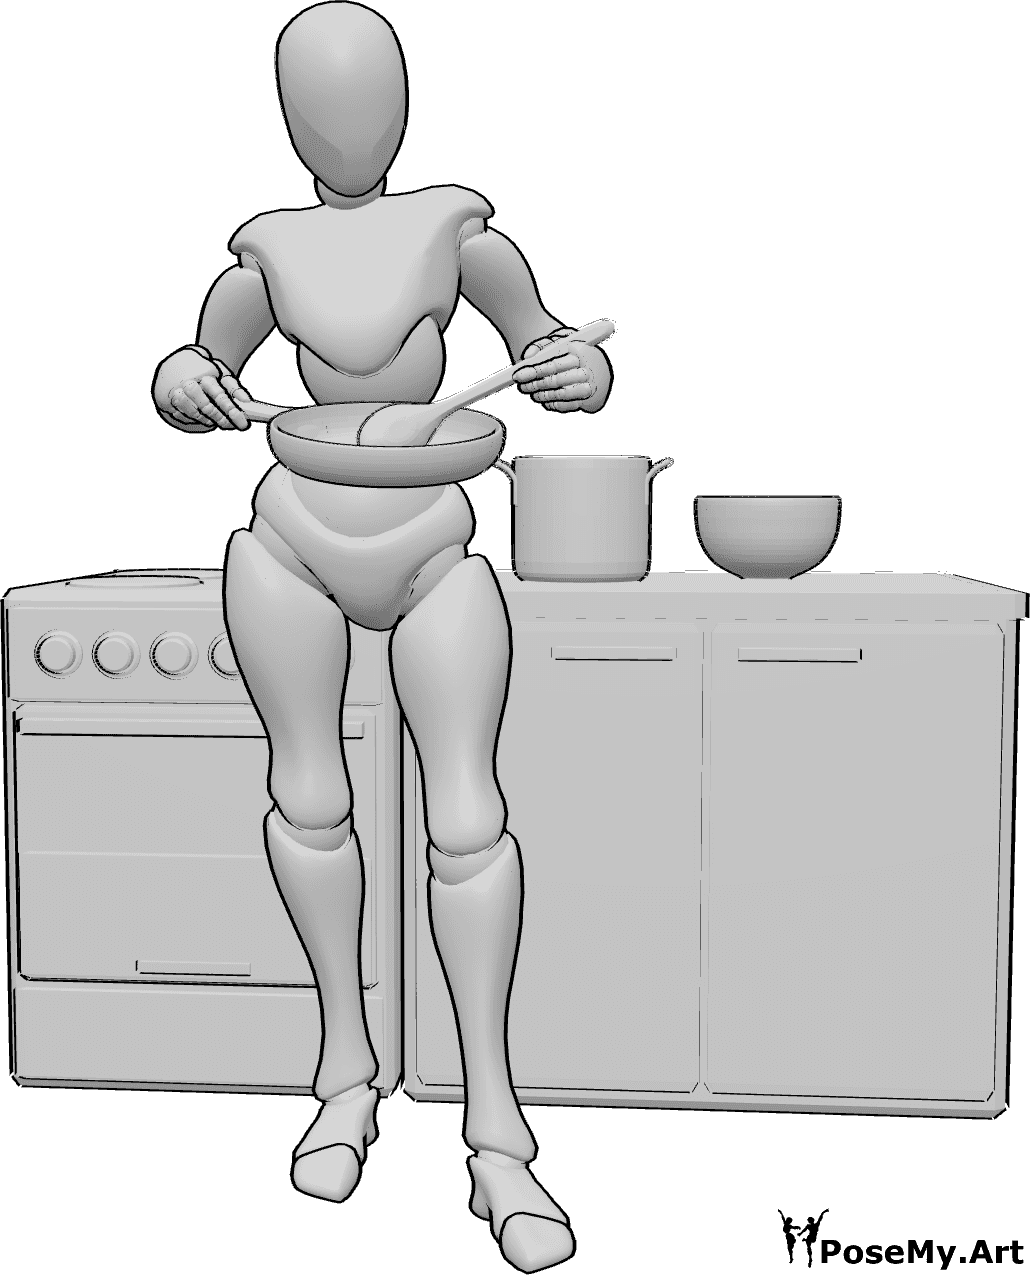 Pose Reference- Standing stirring cooking pose - Female is standing, holding a pan in her right hand and stirring with a wooden spoon in her left hand